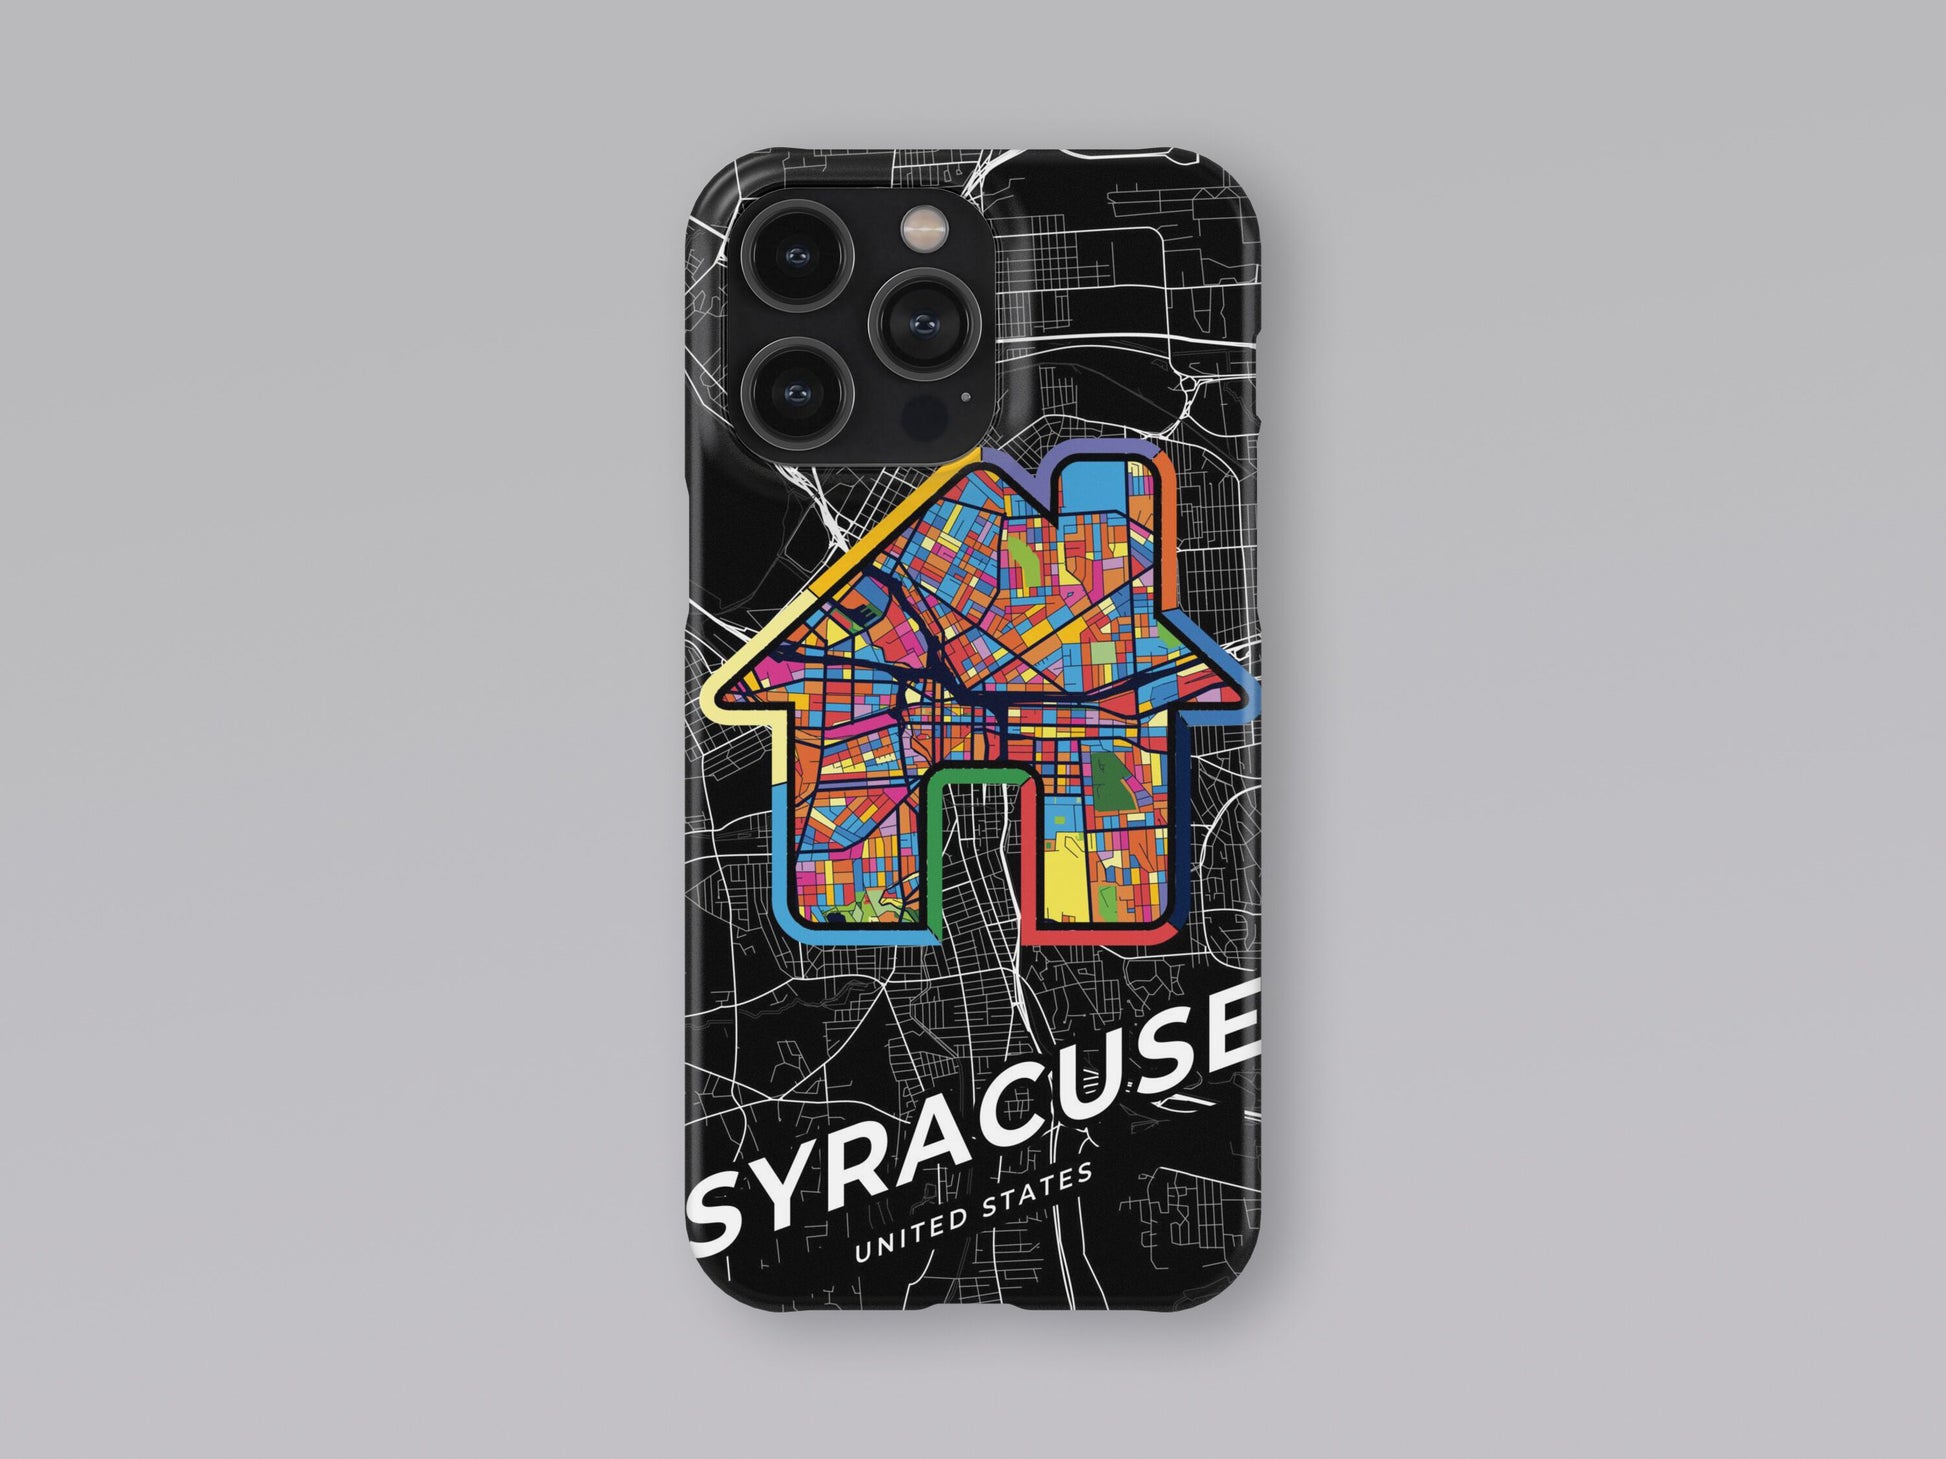 Syracuse New York slim phone case with colorful icon 3